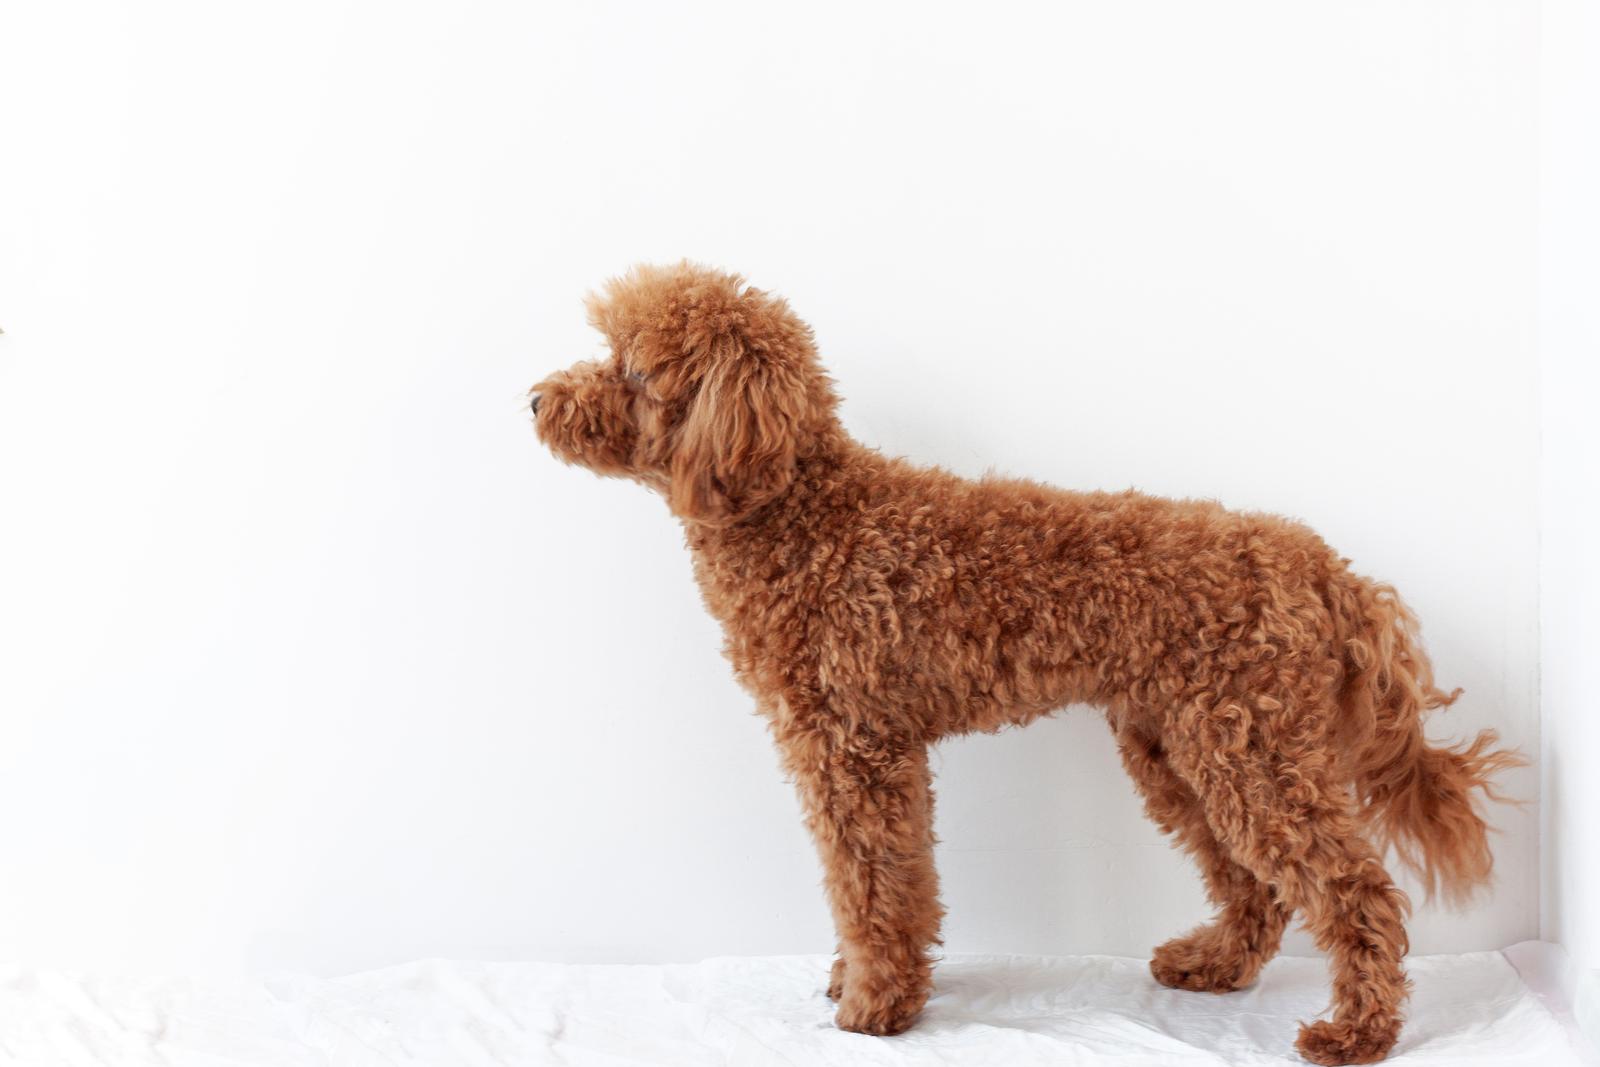 Can a standard poodle live in an apartment?